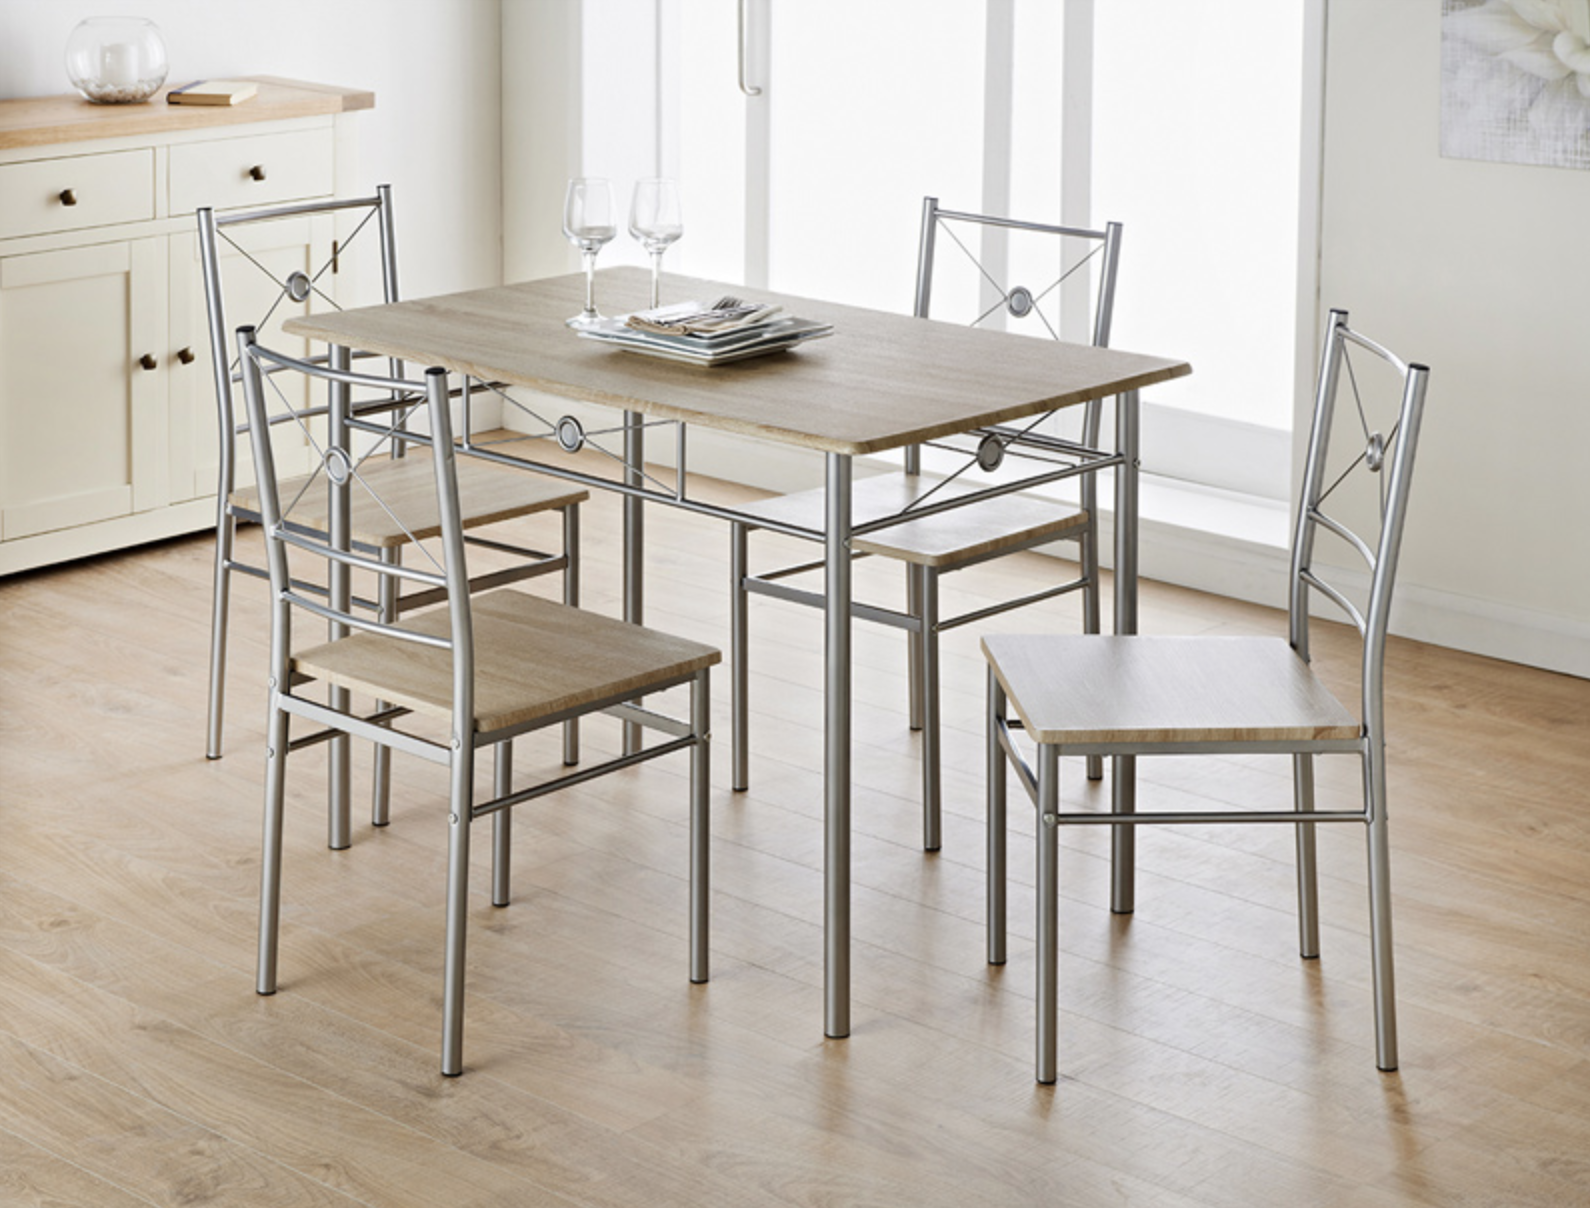 b&m stores furniture dining table